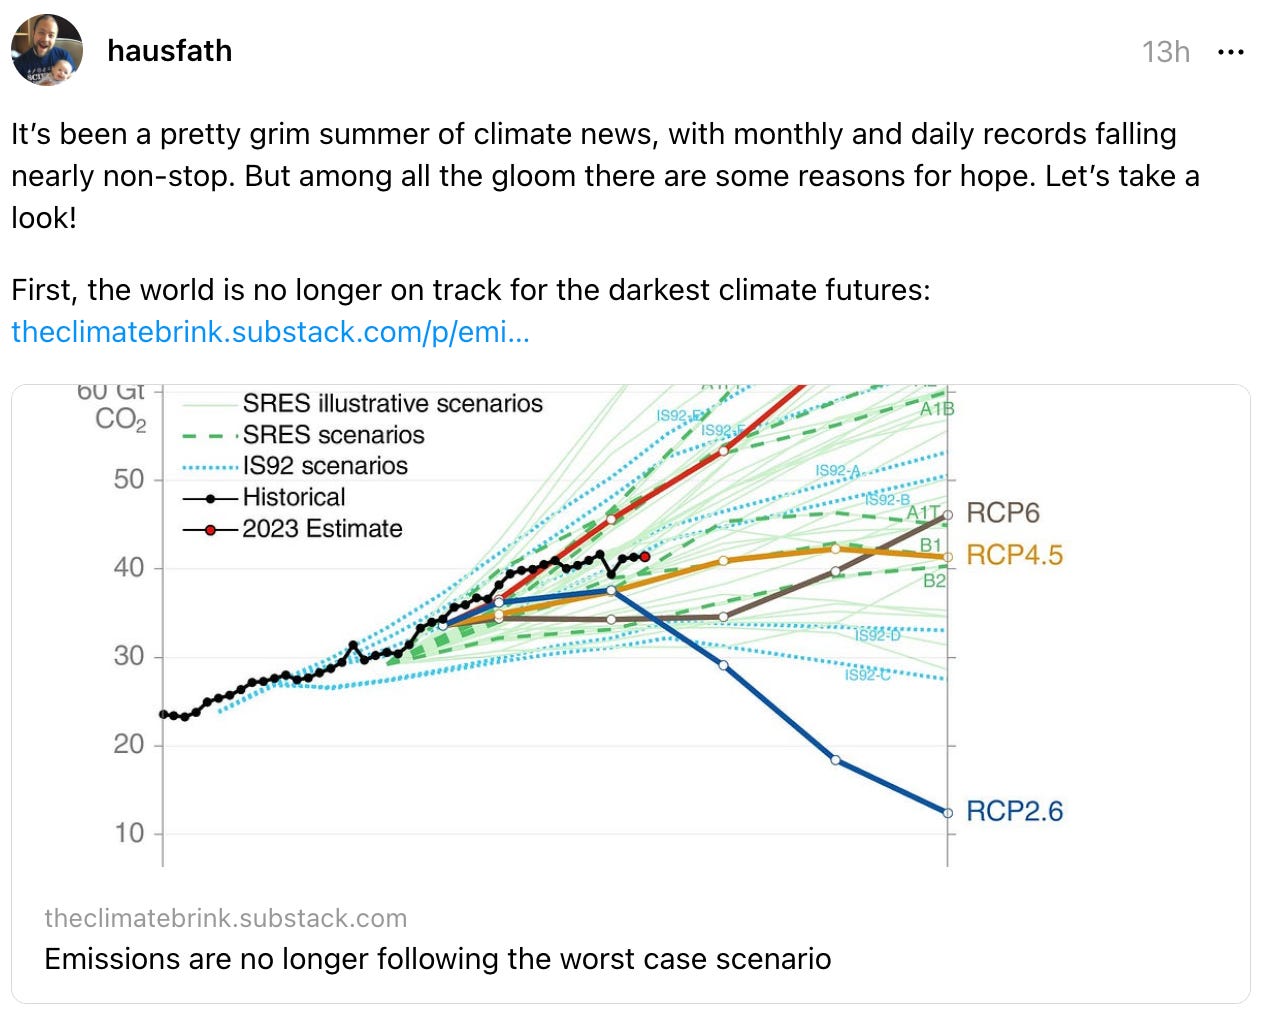  hausfath 13h It’s been a pretty grim summer of climate news, with monthly and daily records falling nearly non-stop. But among all the gloom there are some reasons for hope. Let’s take a look!  First, the world is no longer on track for the darkest climate futures: theclimatebrink.substack.com/p/emi…